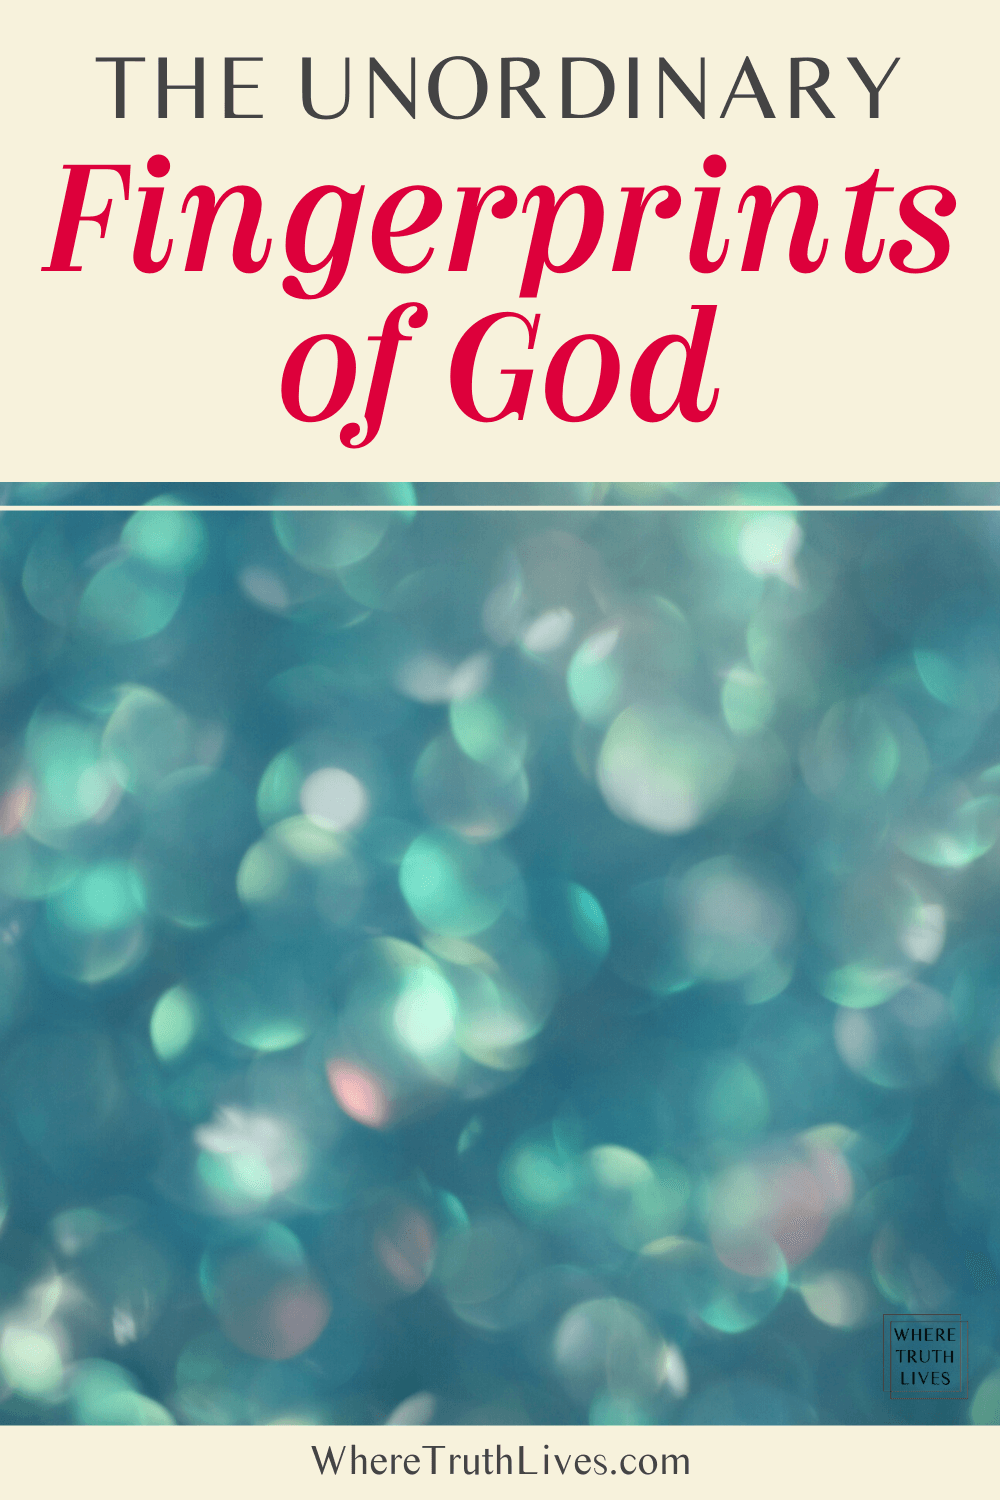 Isn't it strange how ordinary the unordinary fingerprints of God can seem to us? Yet, a closer look reveals that nothing in creation is ordinary after all... | The Unordinary Fingerprints of God | Where Truth Lives .com | Christian blog, devotional